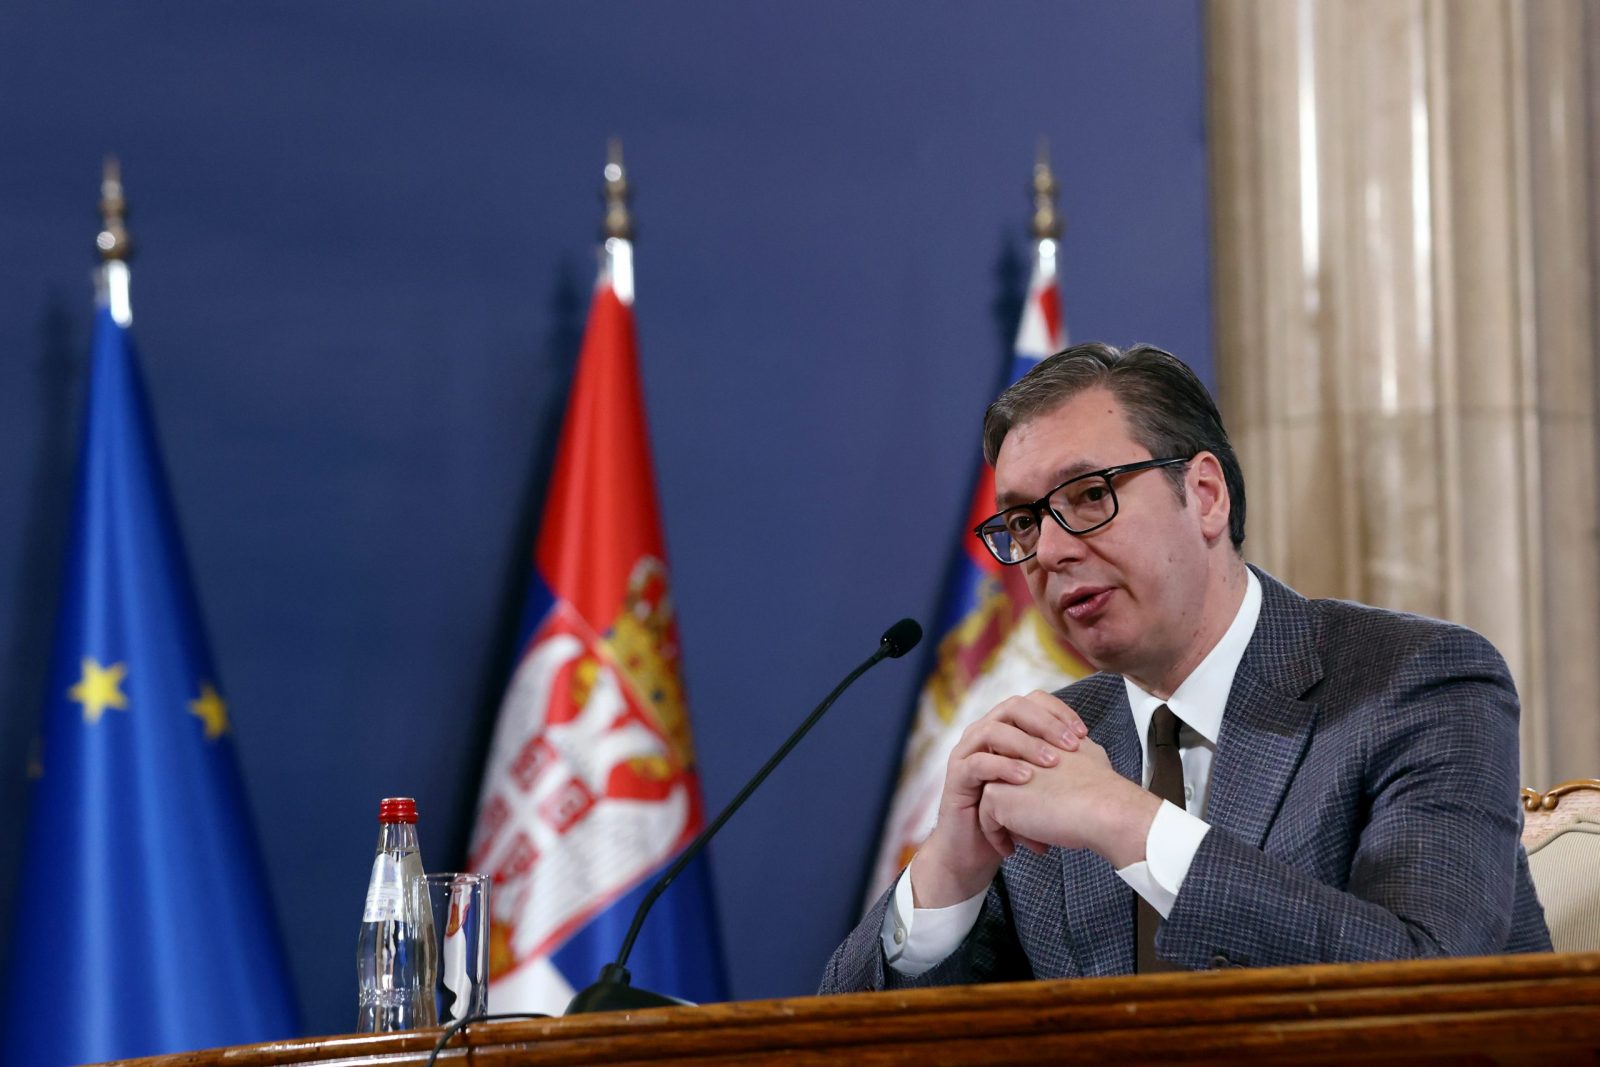 epa10425375 Serbian President Aleksandar Vucic speaks during a press conference in Belgrade, Serbia, 23 January 2023. Vucic held a press conference about the current international brokered dialogue for the normalization of relations between Serbia and Kosovo, which proclaimed independence from Serbia in 2008.  EPA/ANDREJ CUKIC